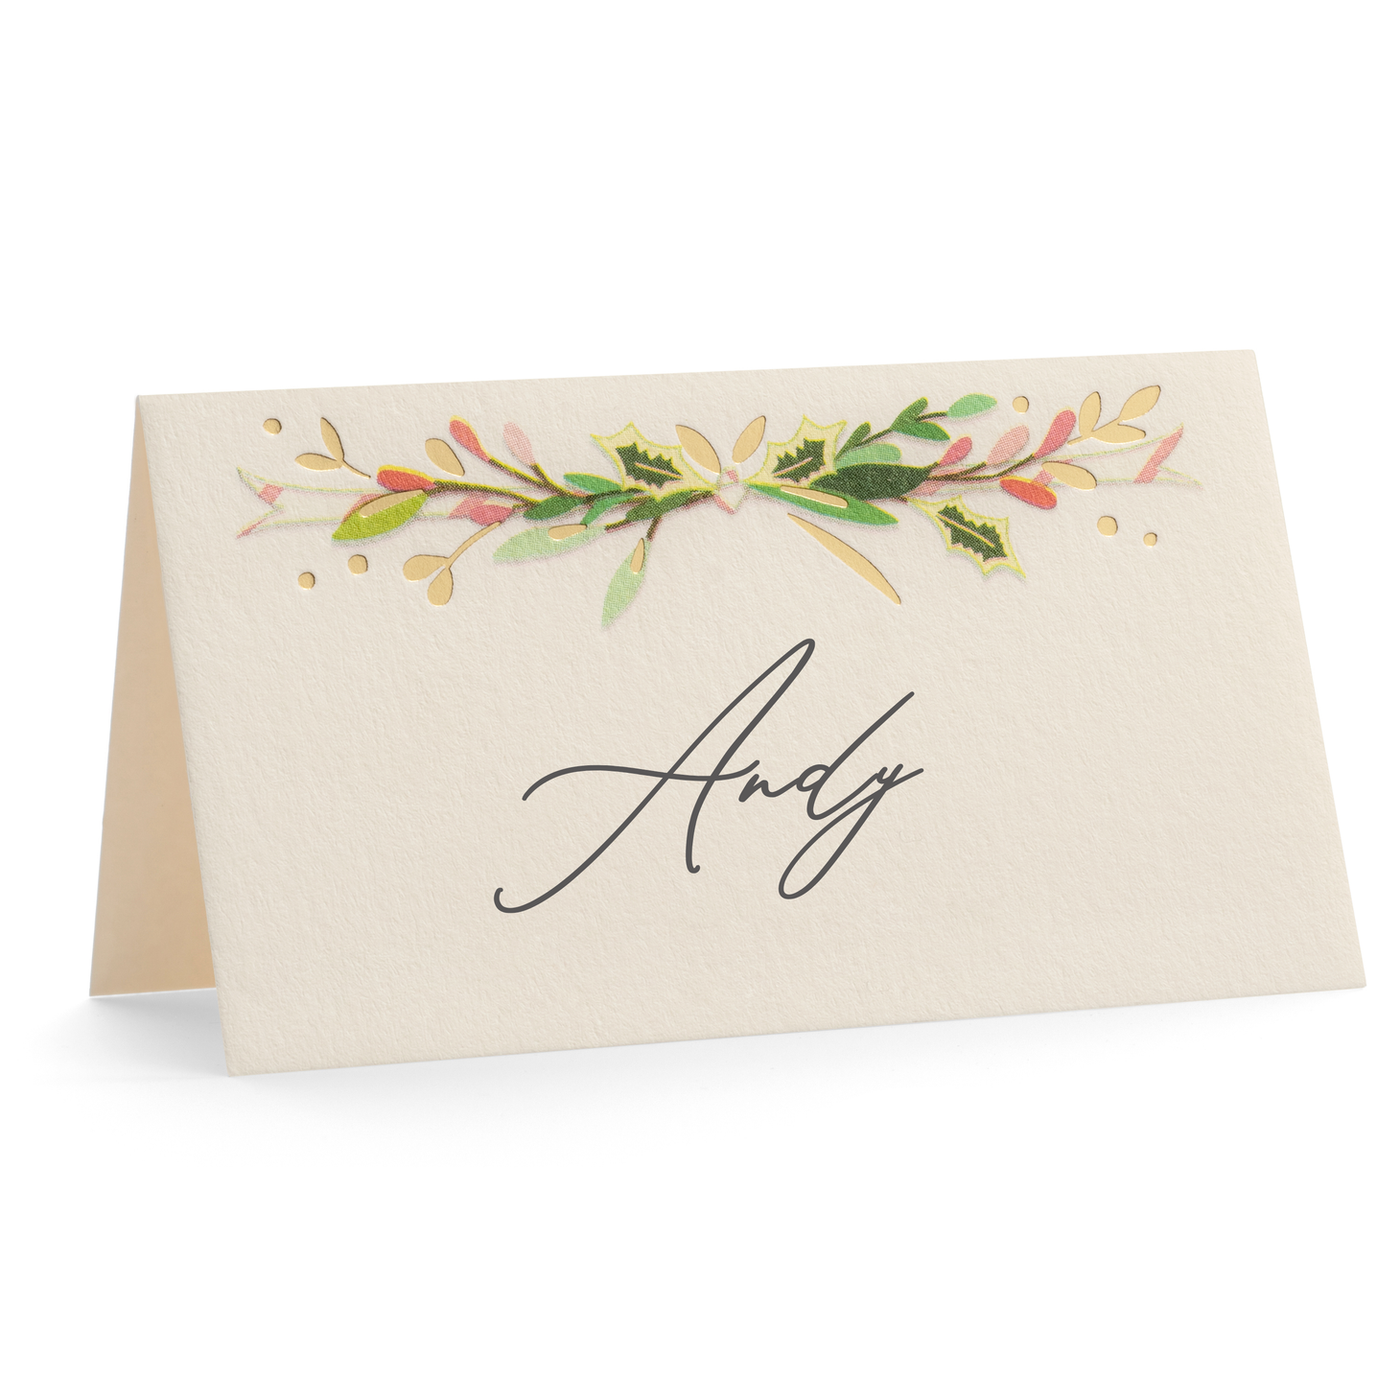 Winter Holiday Place Card